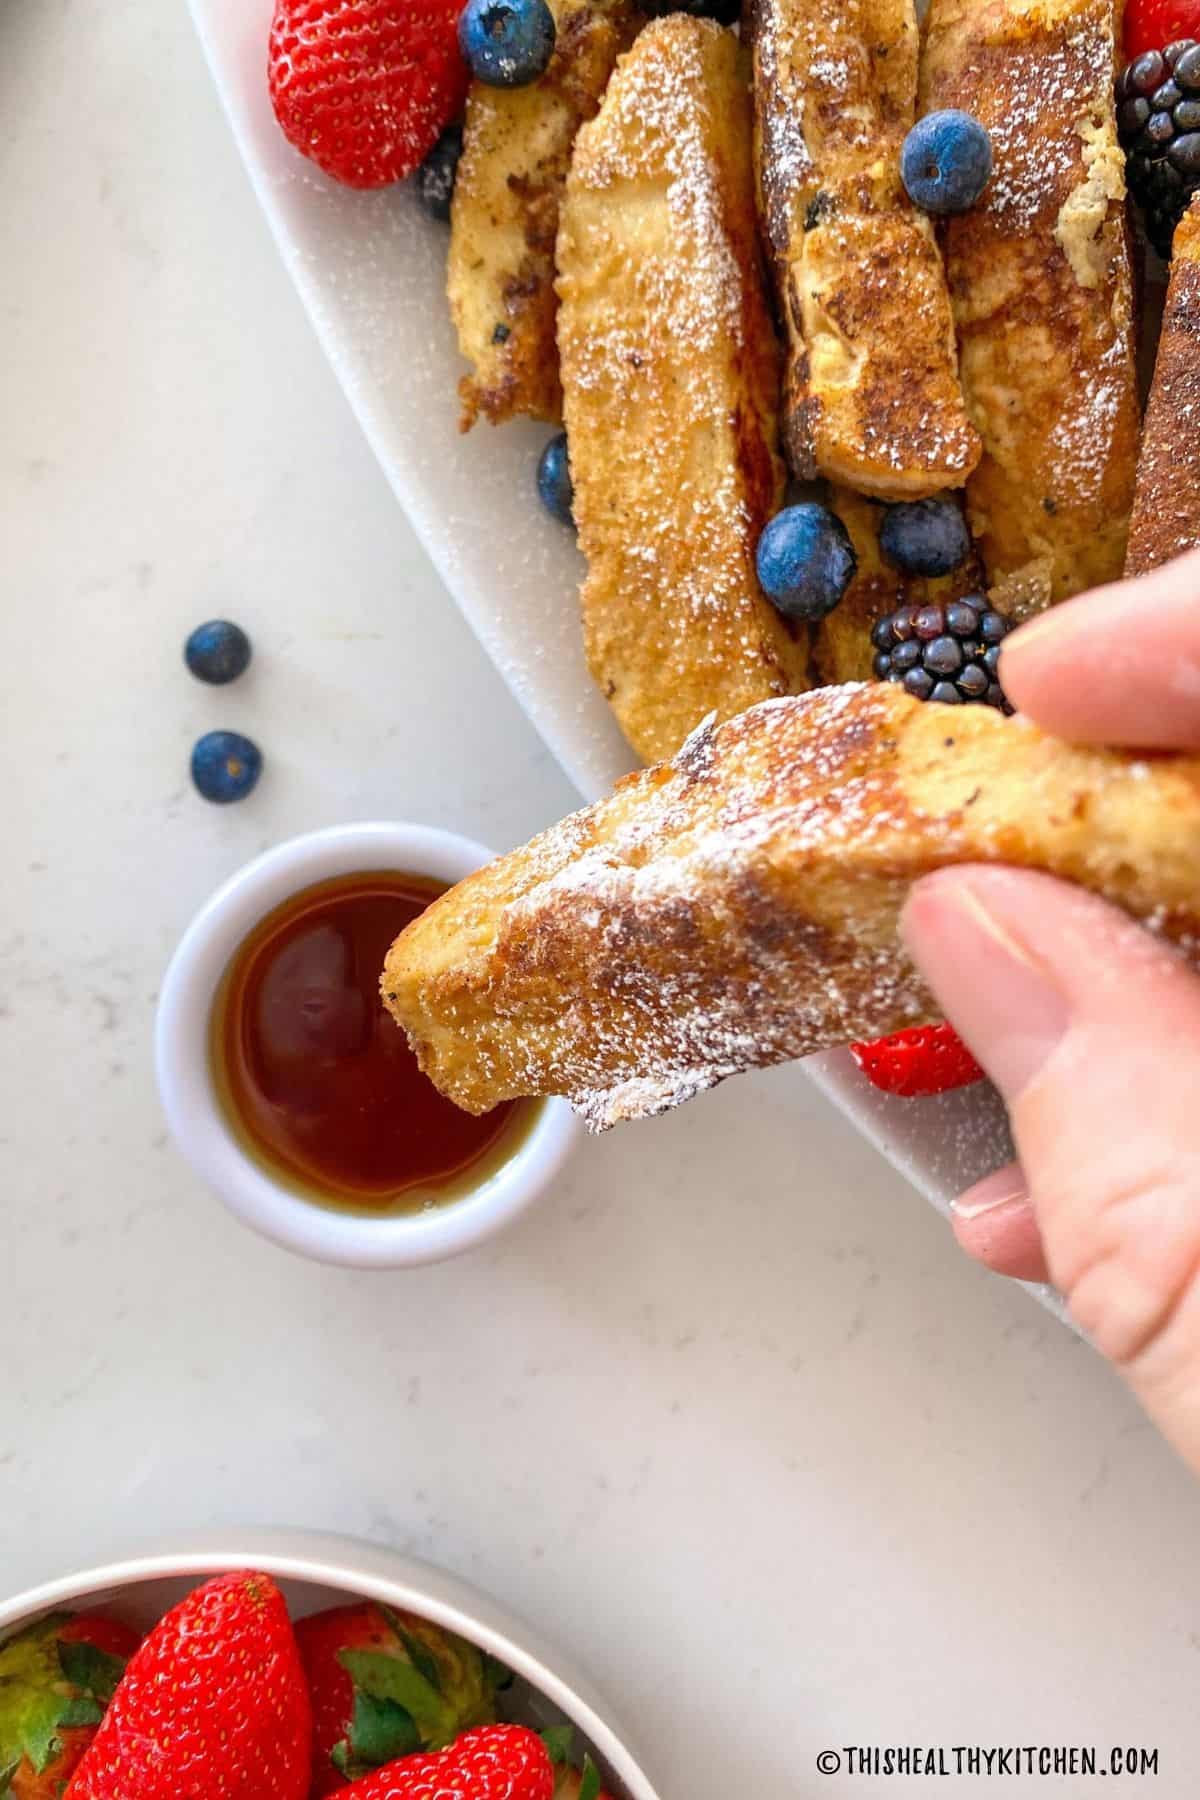 Hand dipping french toast stick into bowl of maple syrup.